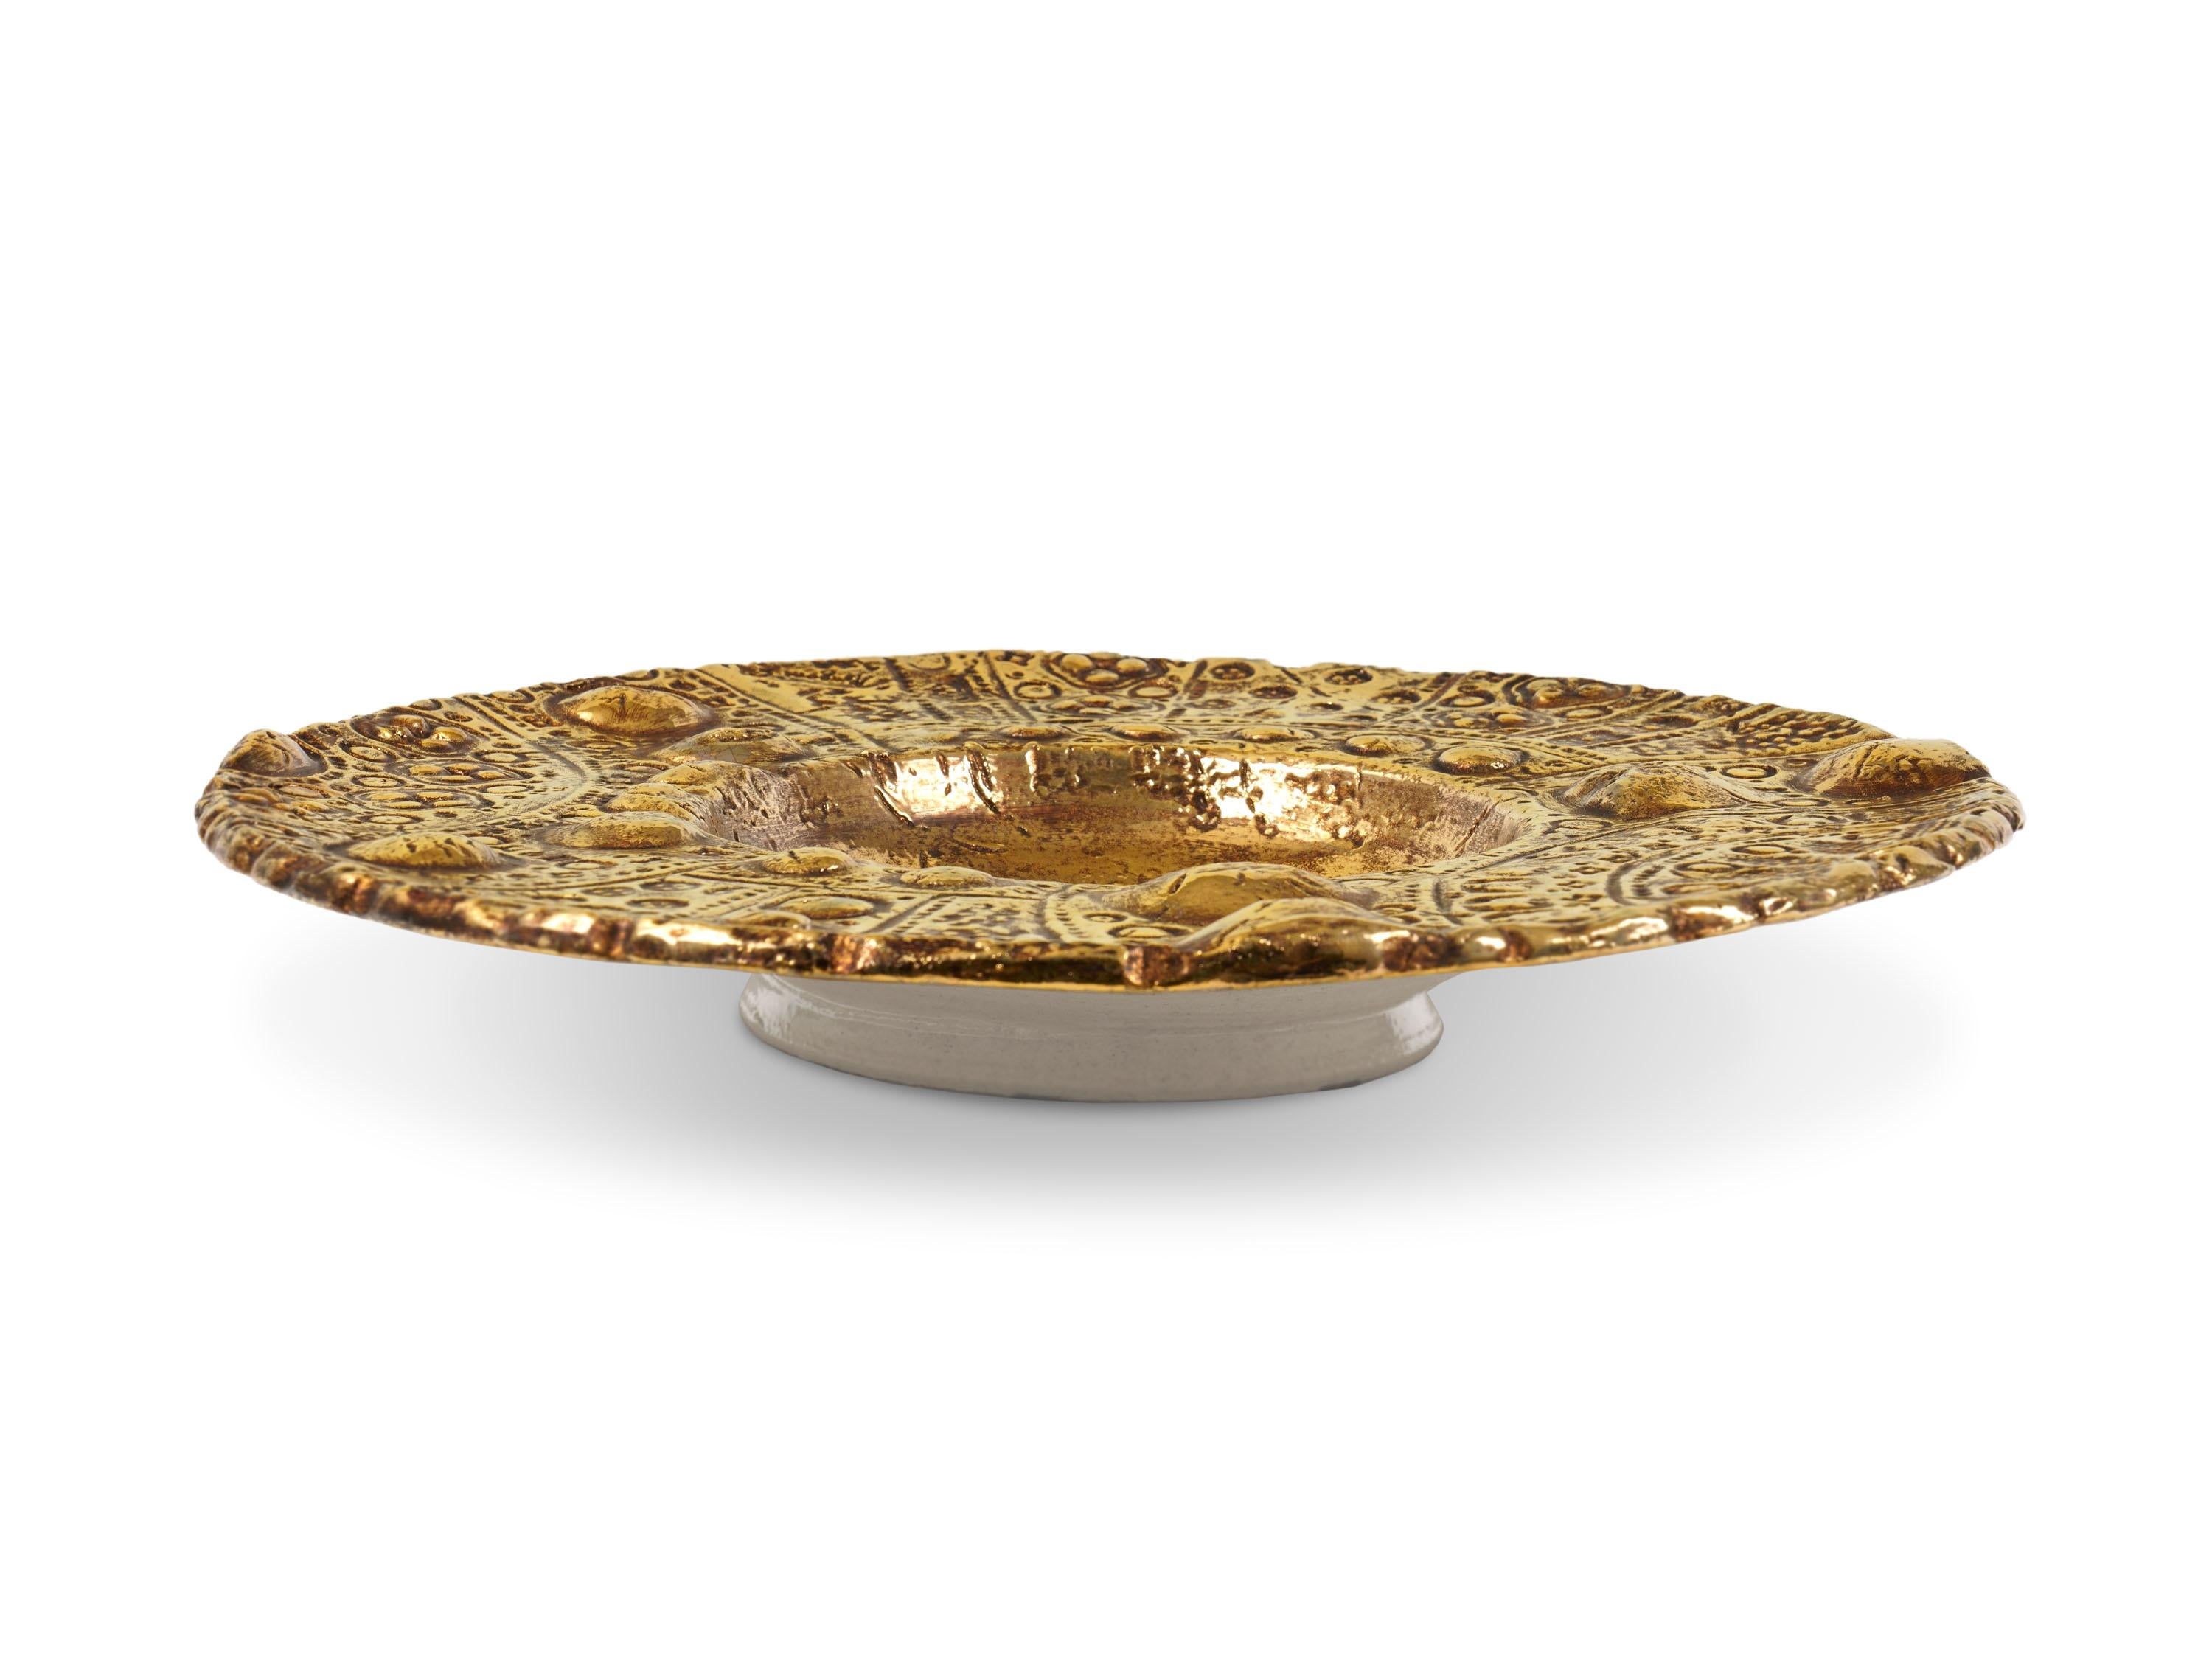 Majestic sculptural plate made of ceramic and decorated in 24 Karat gold with the luster technique. The plate can be used as a centerpiece or can be modified to be wall mounted upon request. This sculptural plate has a great aesthetic impact thanks